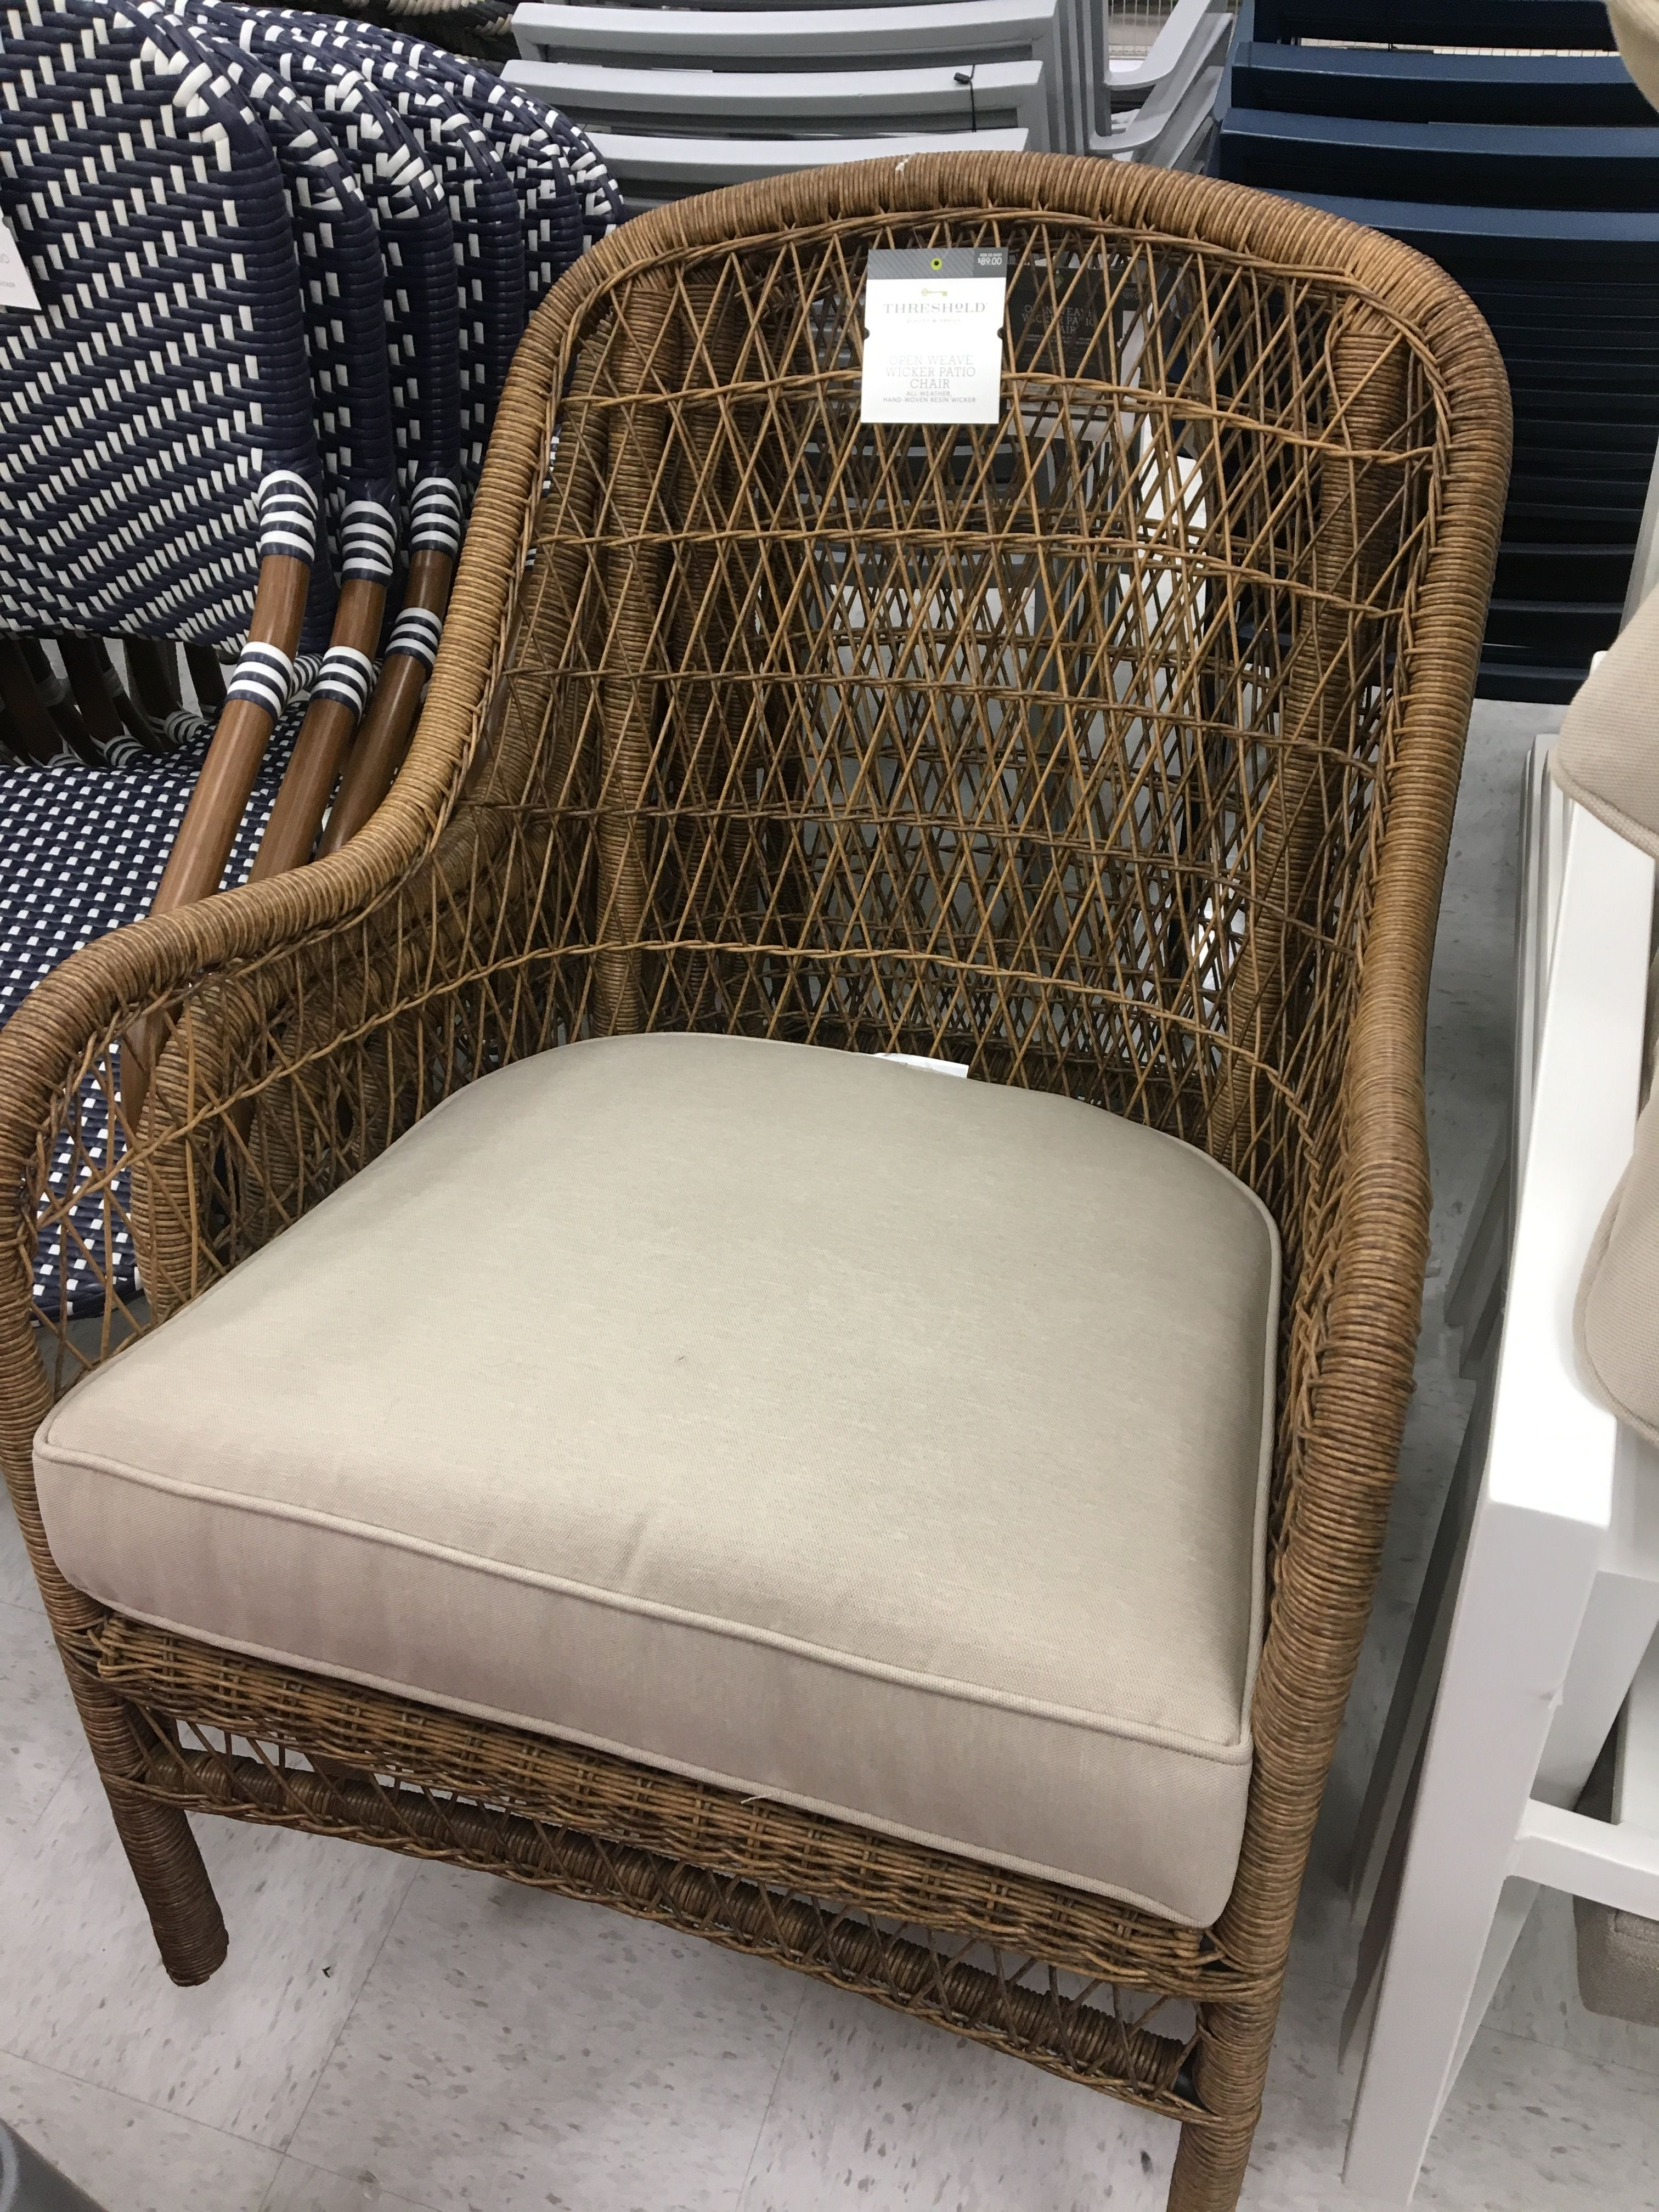 New Target Patio Furniture Love The Wicker Chairs Target for dimensions 3024 X 4032